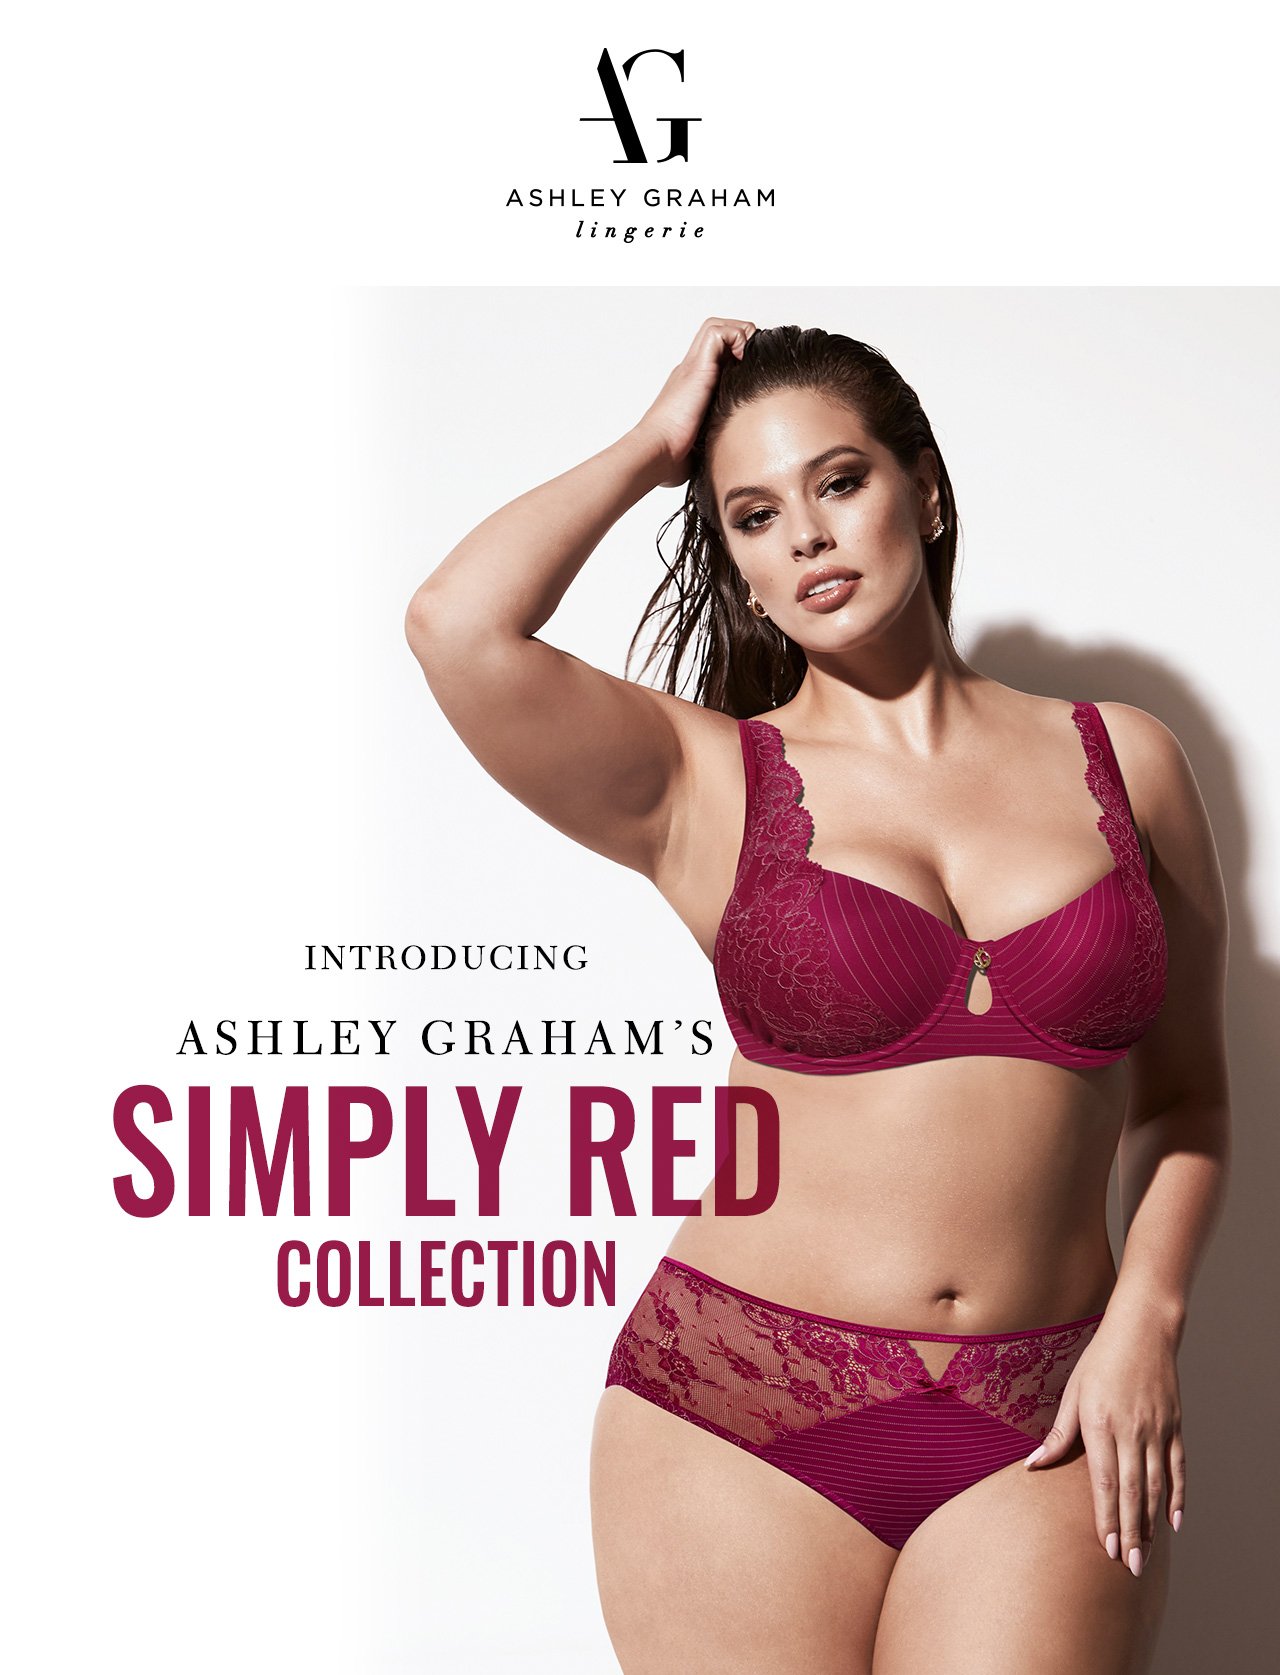 Ashley Graham's New Addition Elle Lingerie Campaign Is First